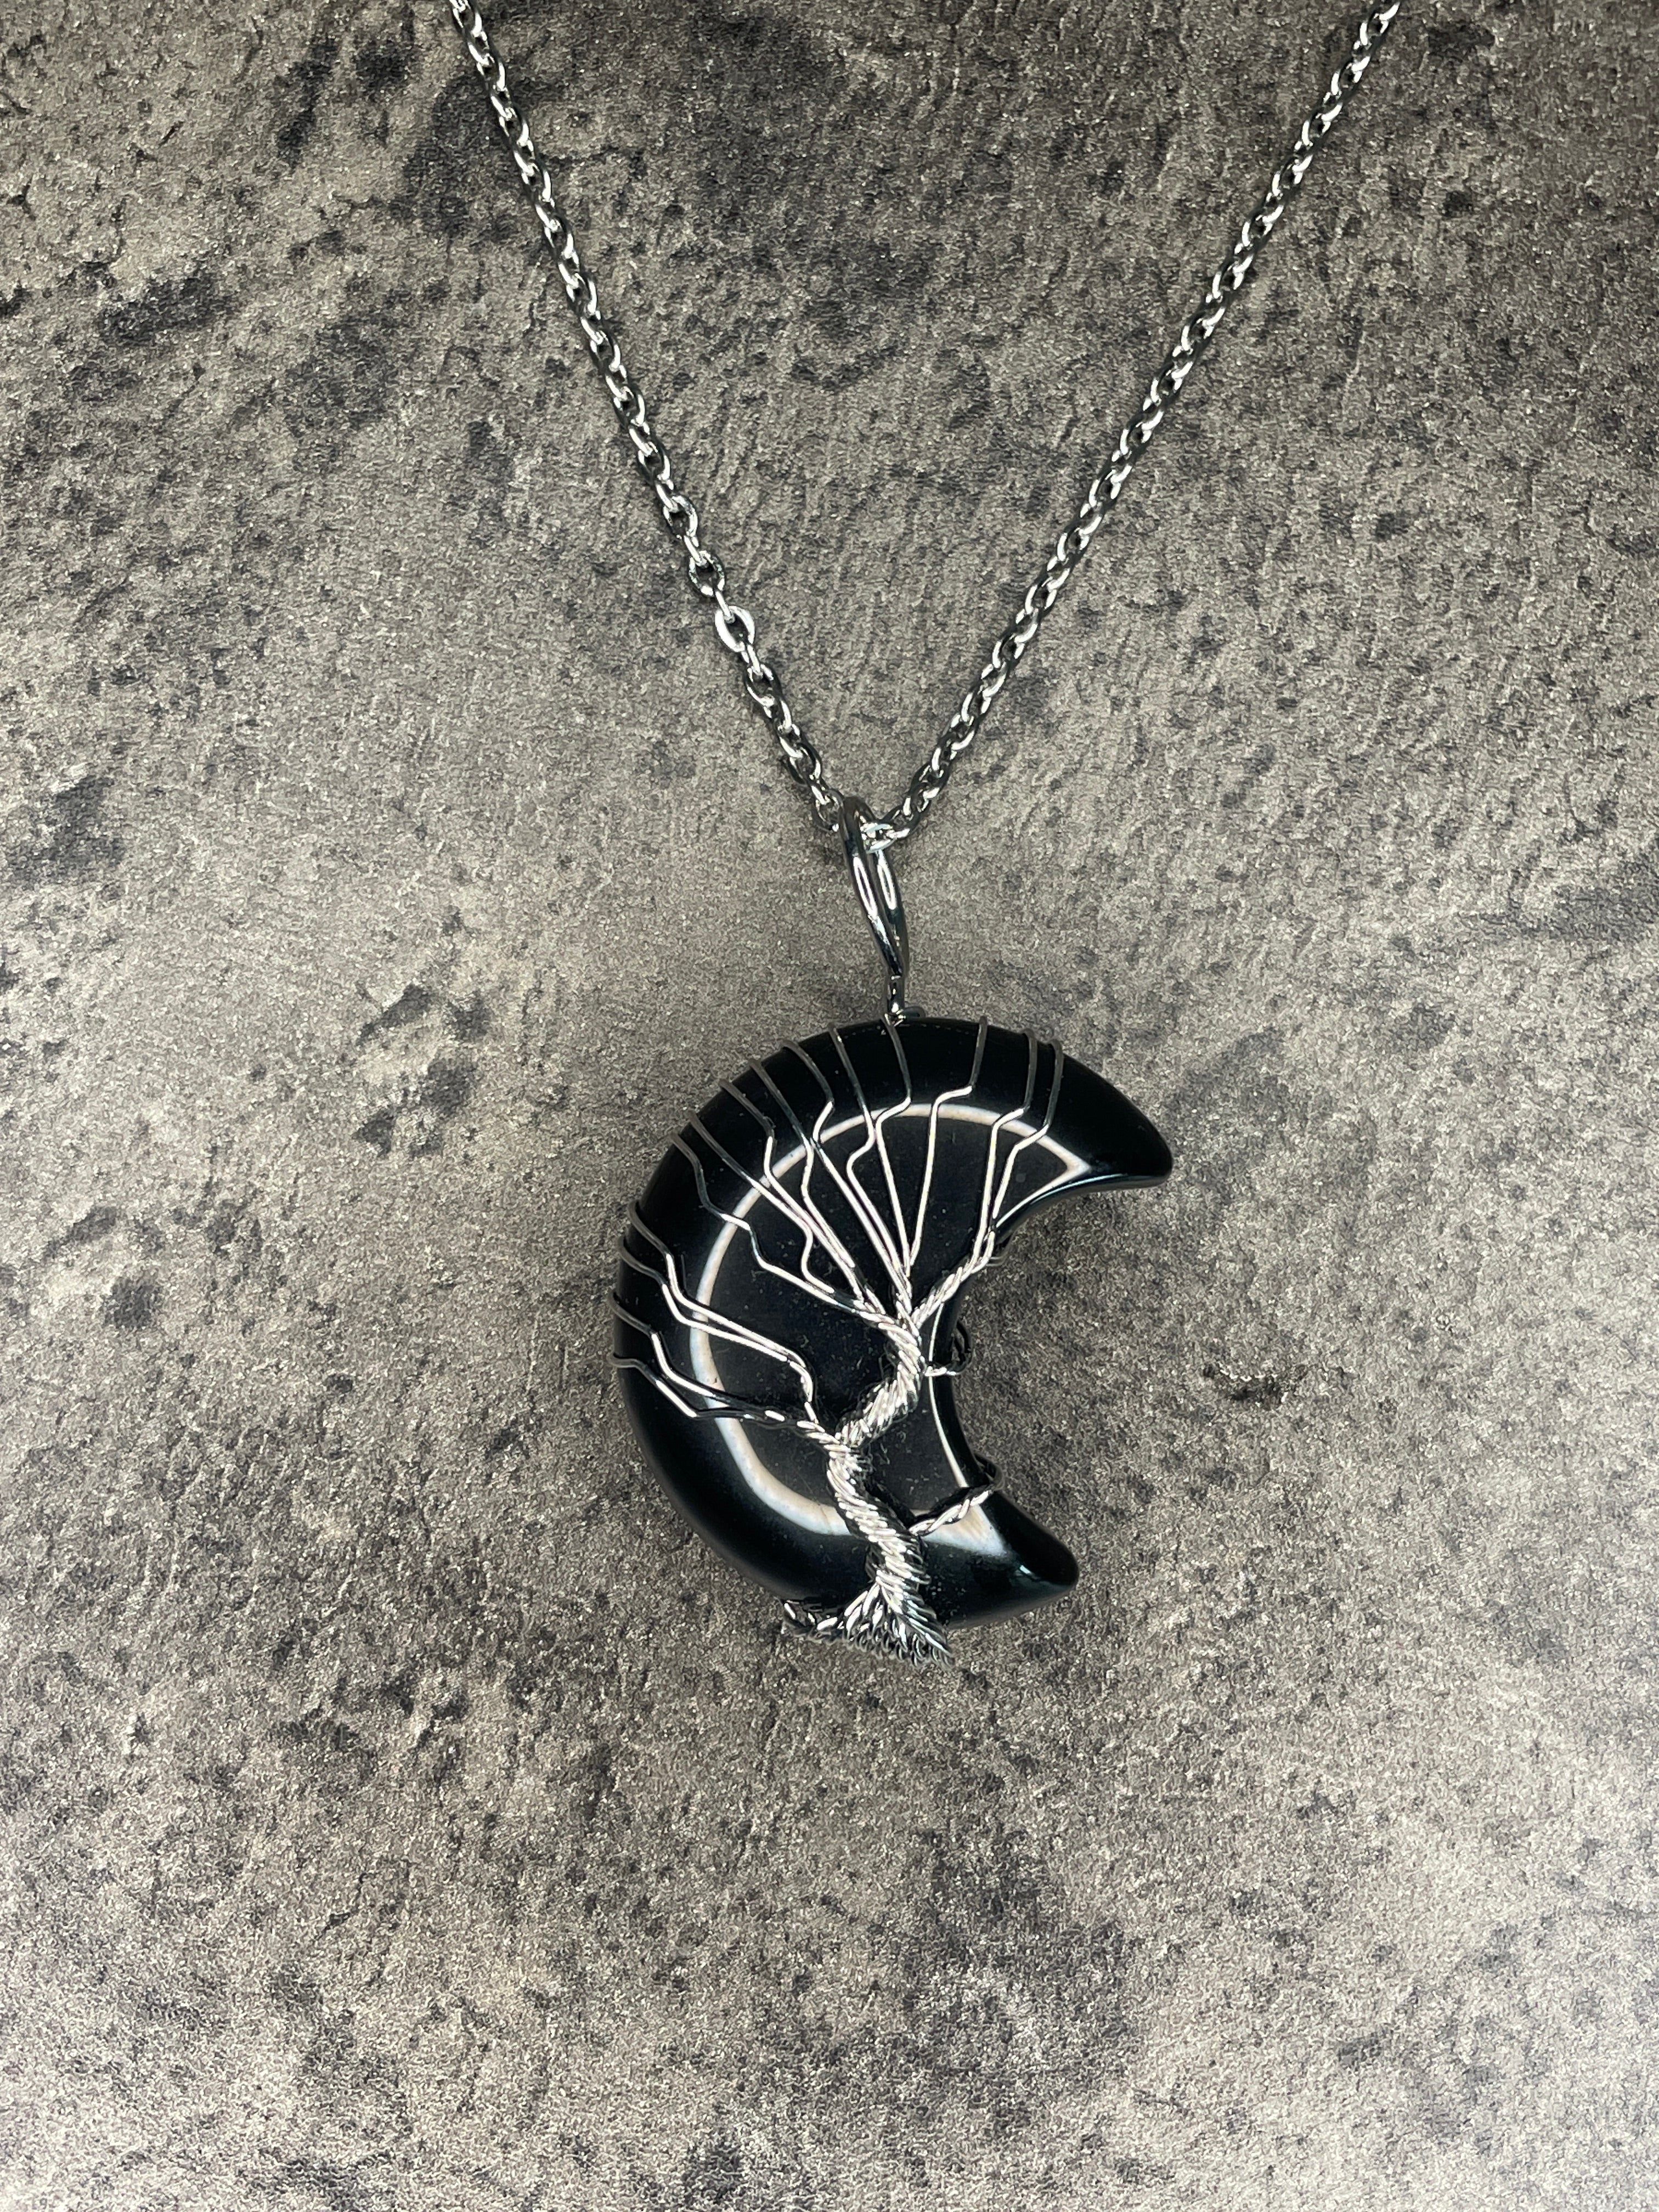 Black obsidian moon pendant and necklace